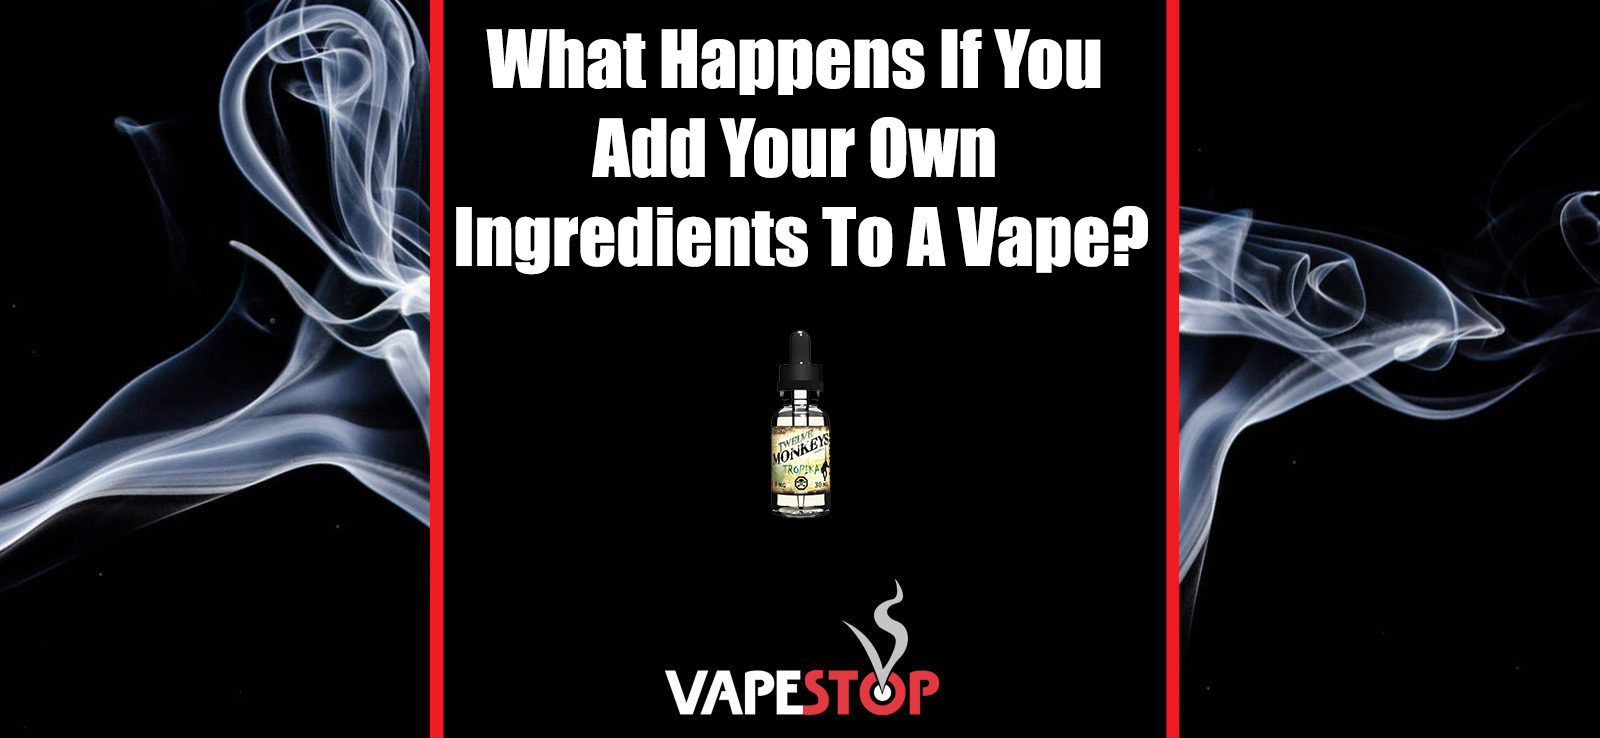 adding your own ingredients to ejuice - vapestop